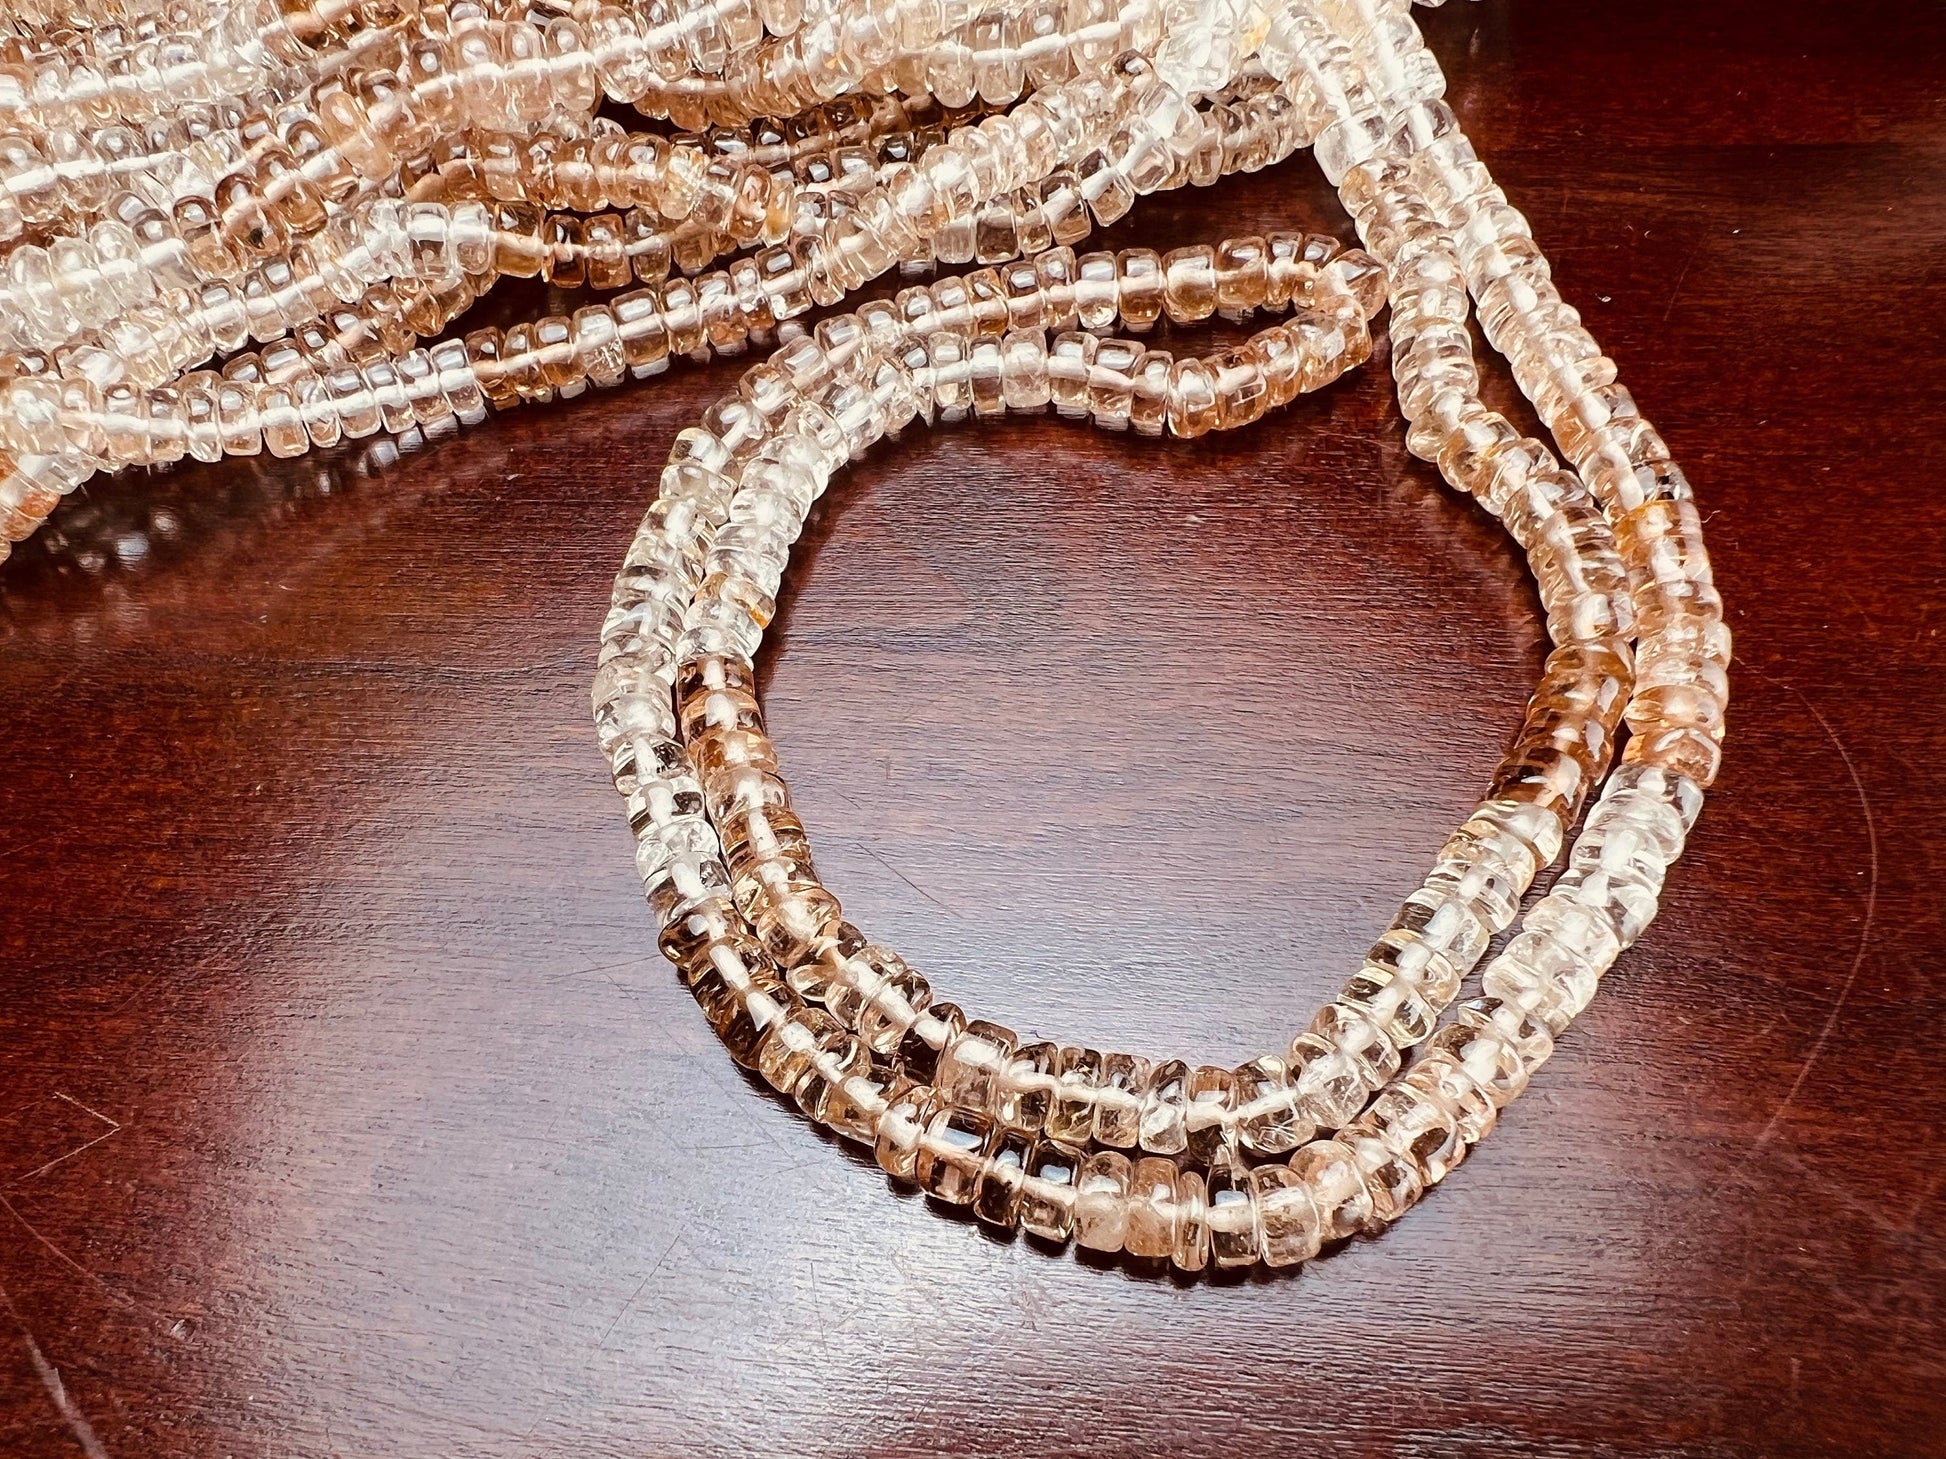 Imperial Topaz Smooth Heishi Roundel 4.5-6.5mm brown Shaded Natural gemstone beads Jewelry Making, 8” and 16” strand